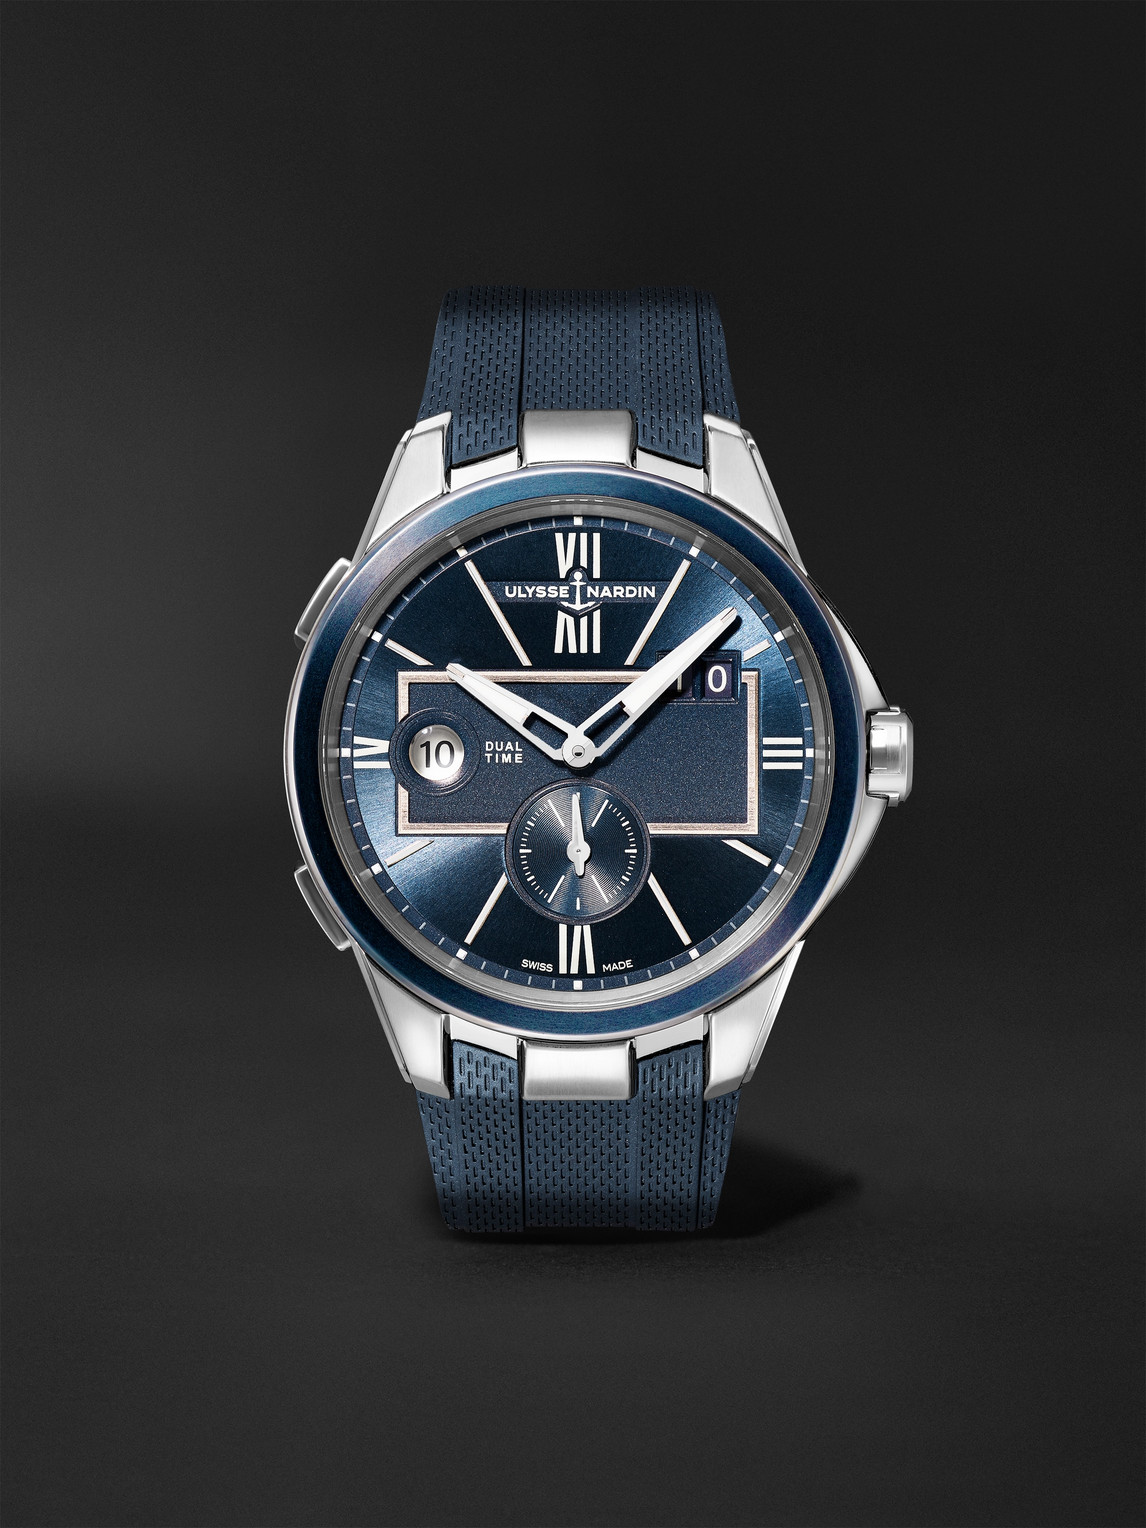 Ulysse Nardin Dual Time Automatic 42mm Stainless Steel And Rubber Watch, Ref. No. 243-20-3/43 In Blue